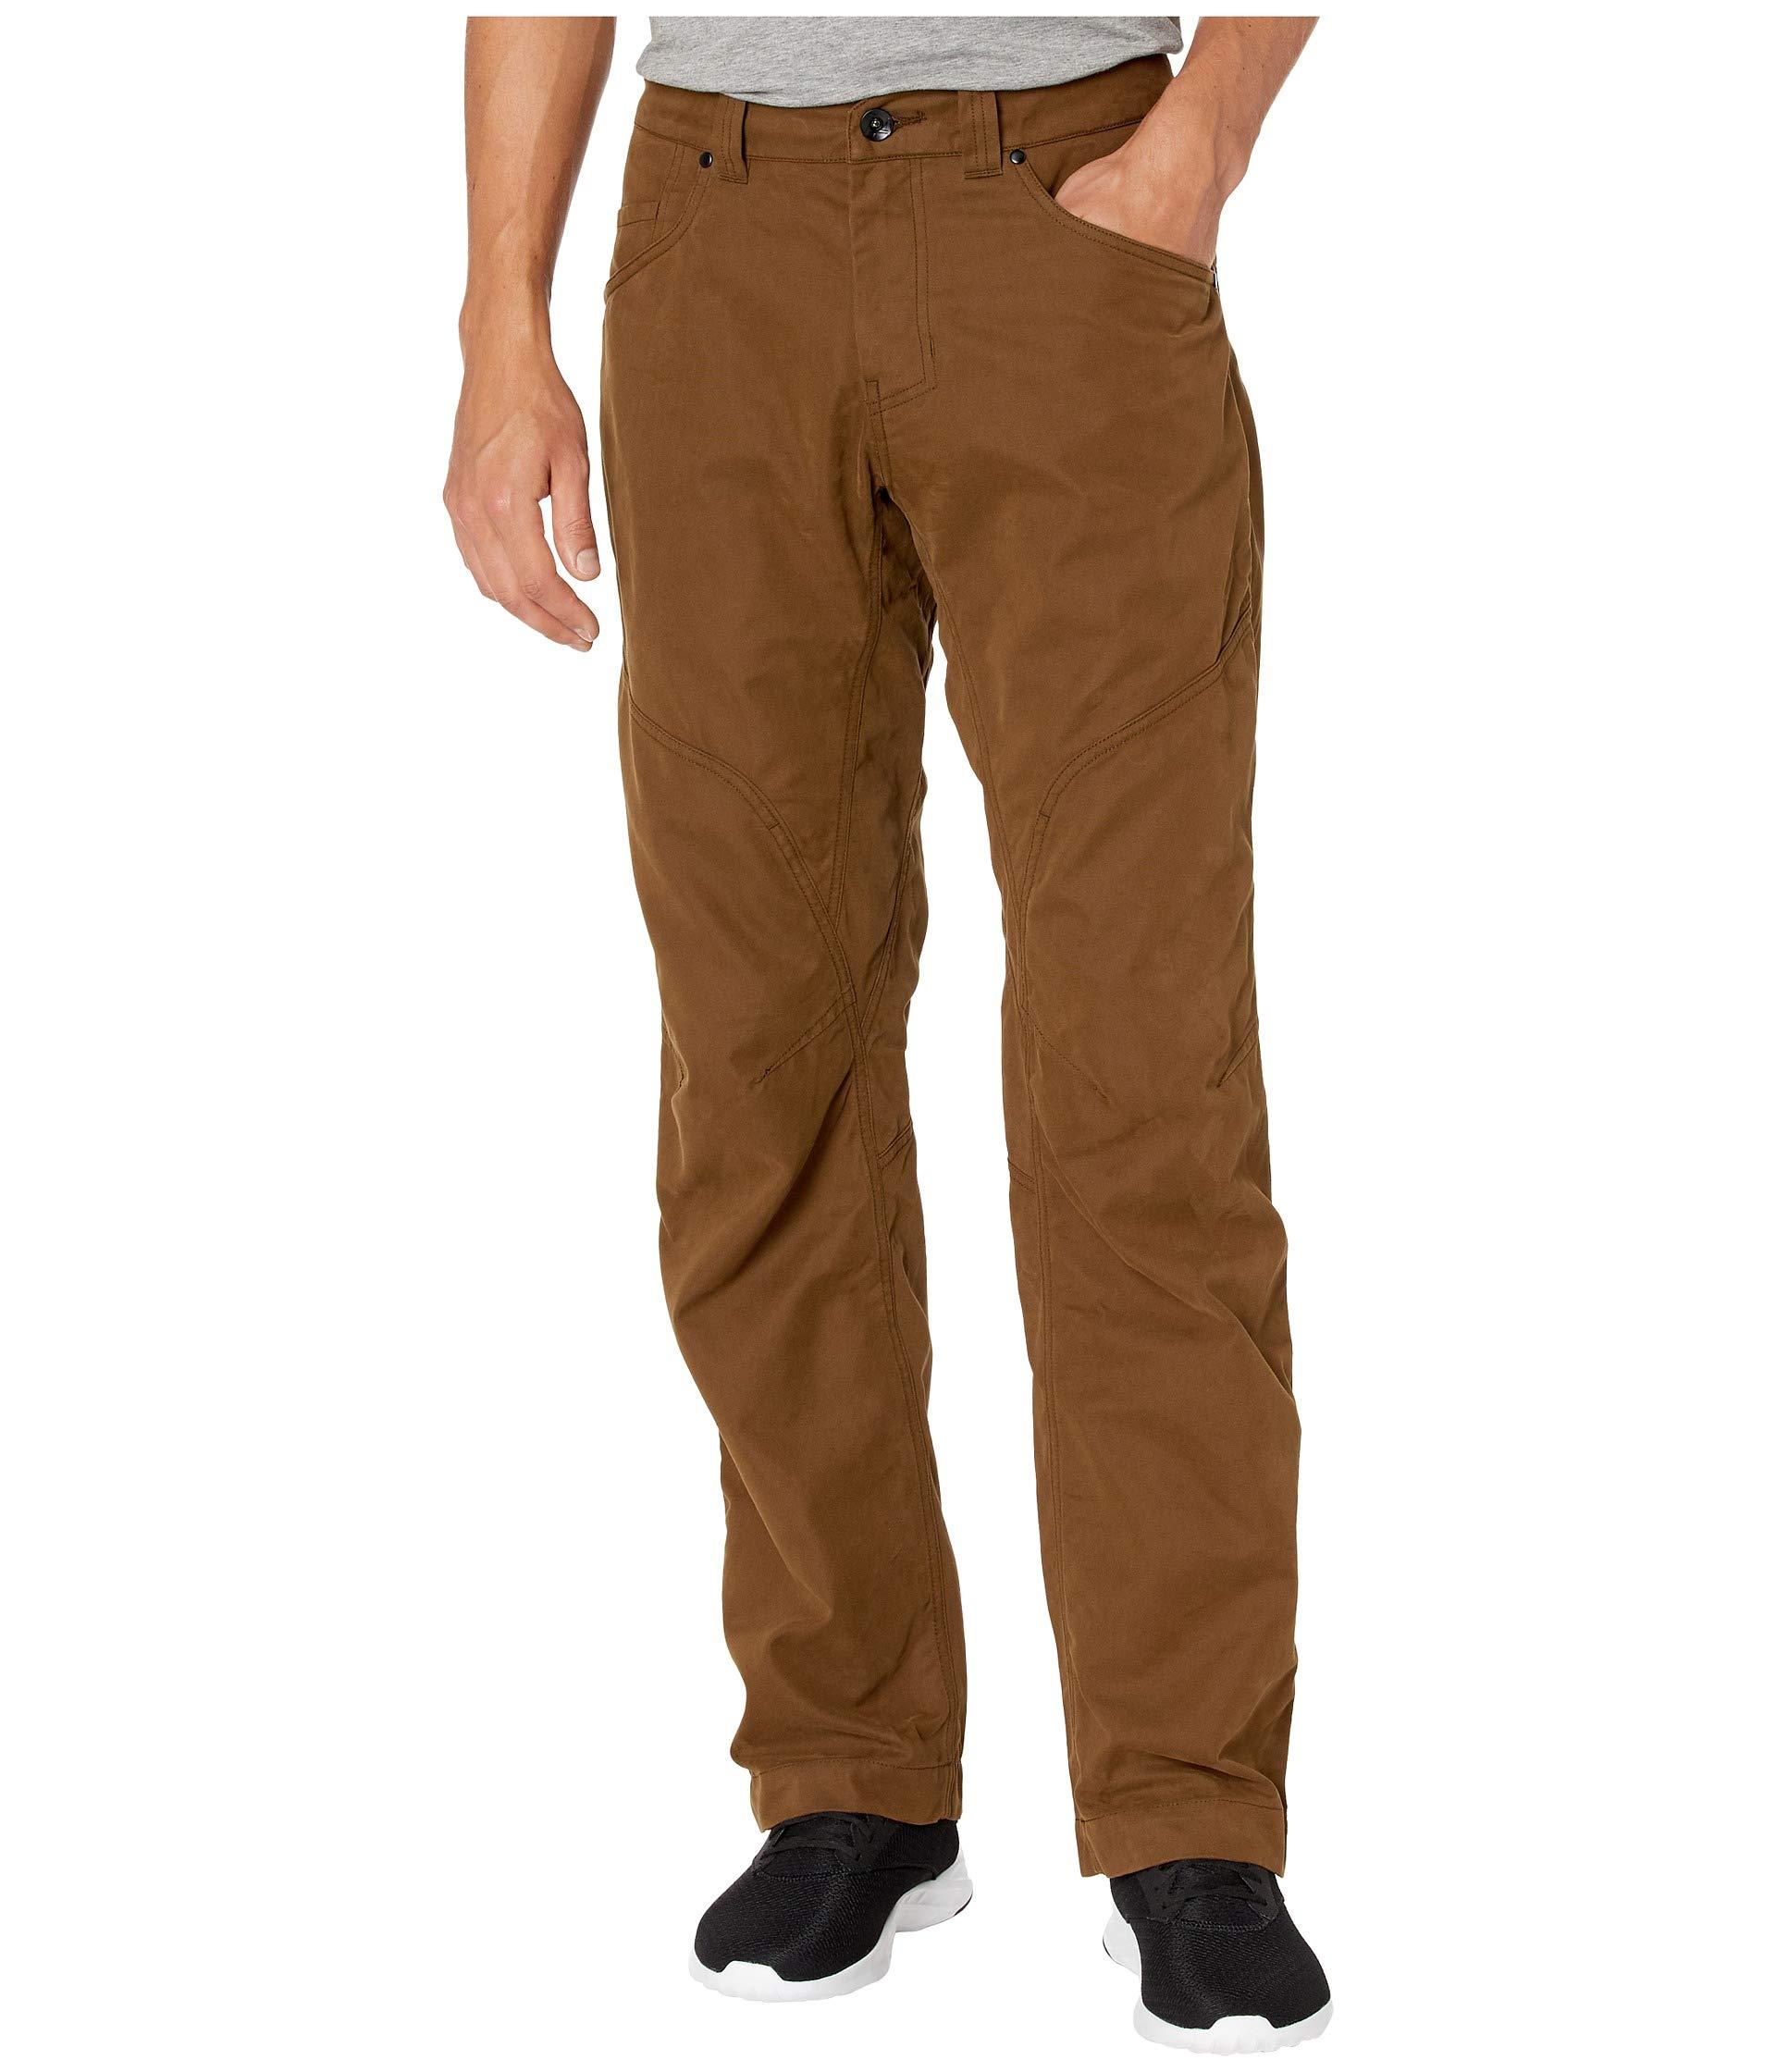 Arc'teryx Canvas Cronin Pants in Brown for Men - Lyst